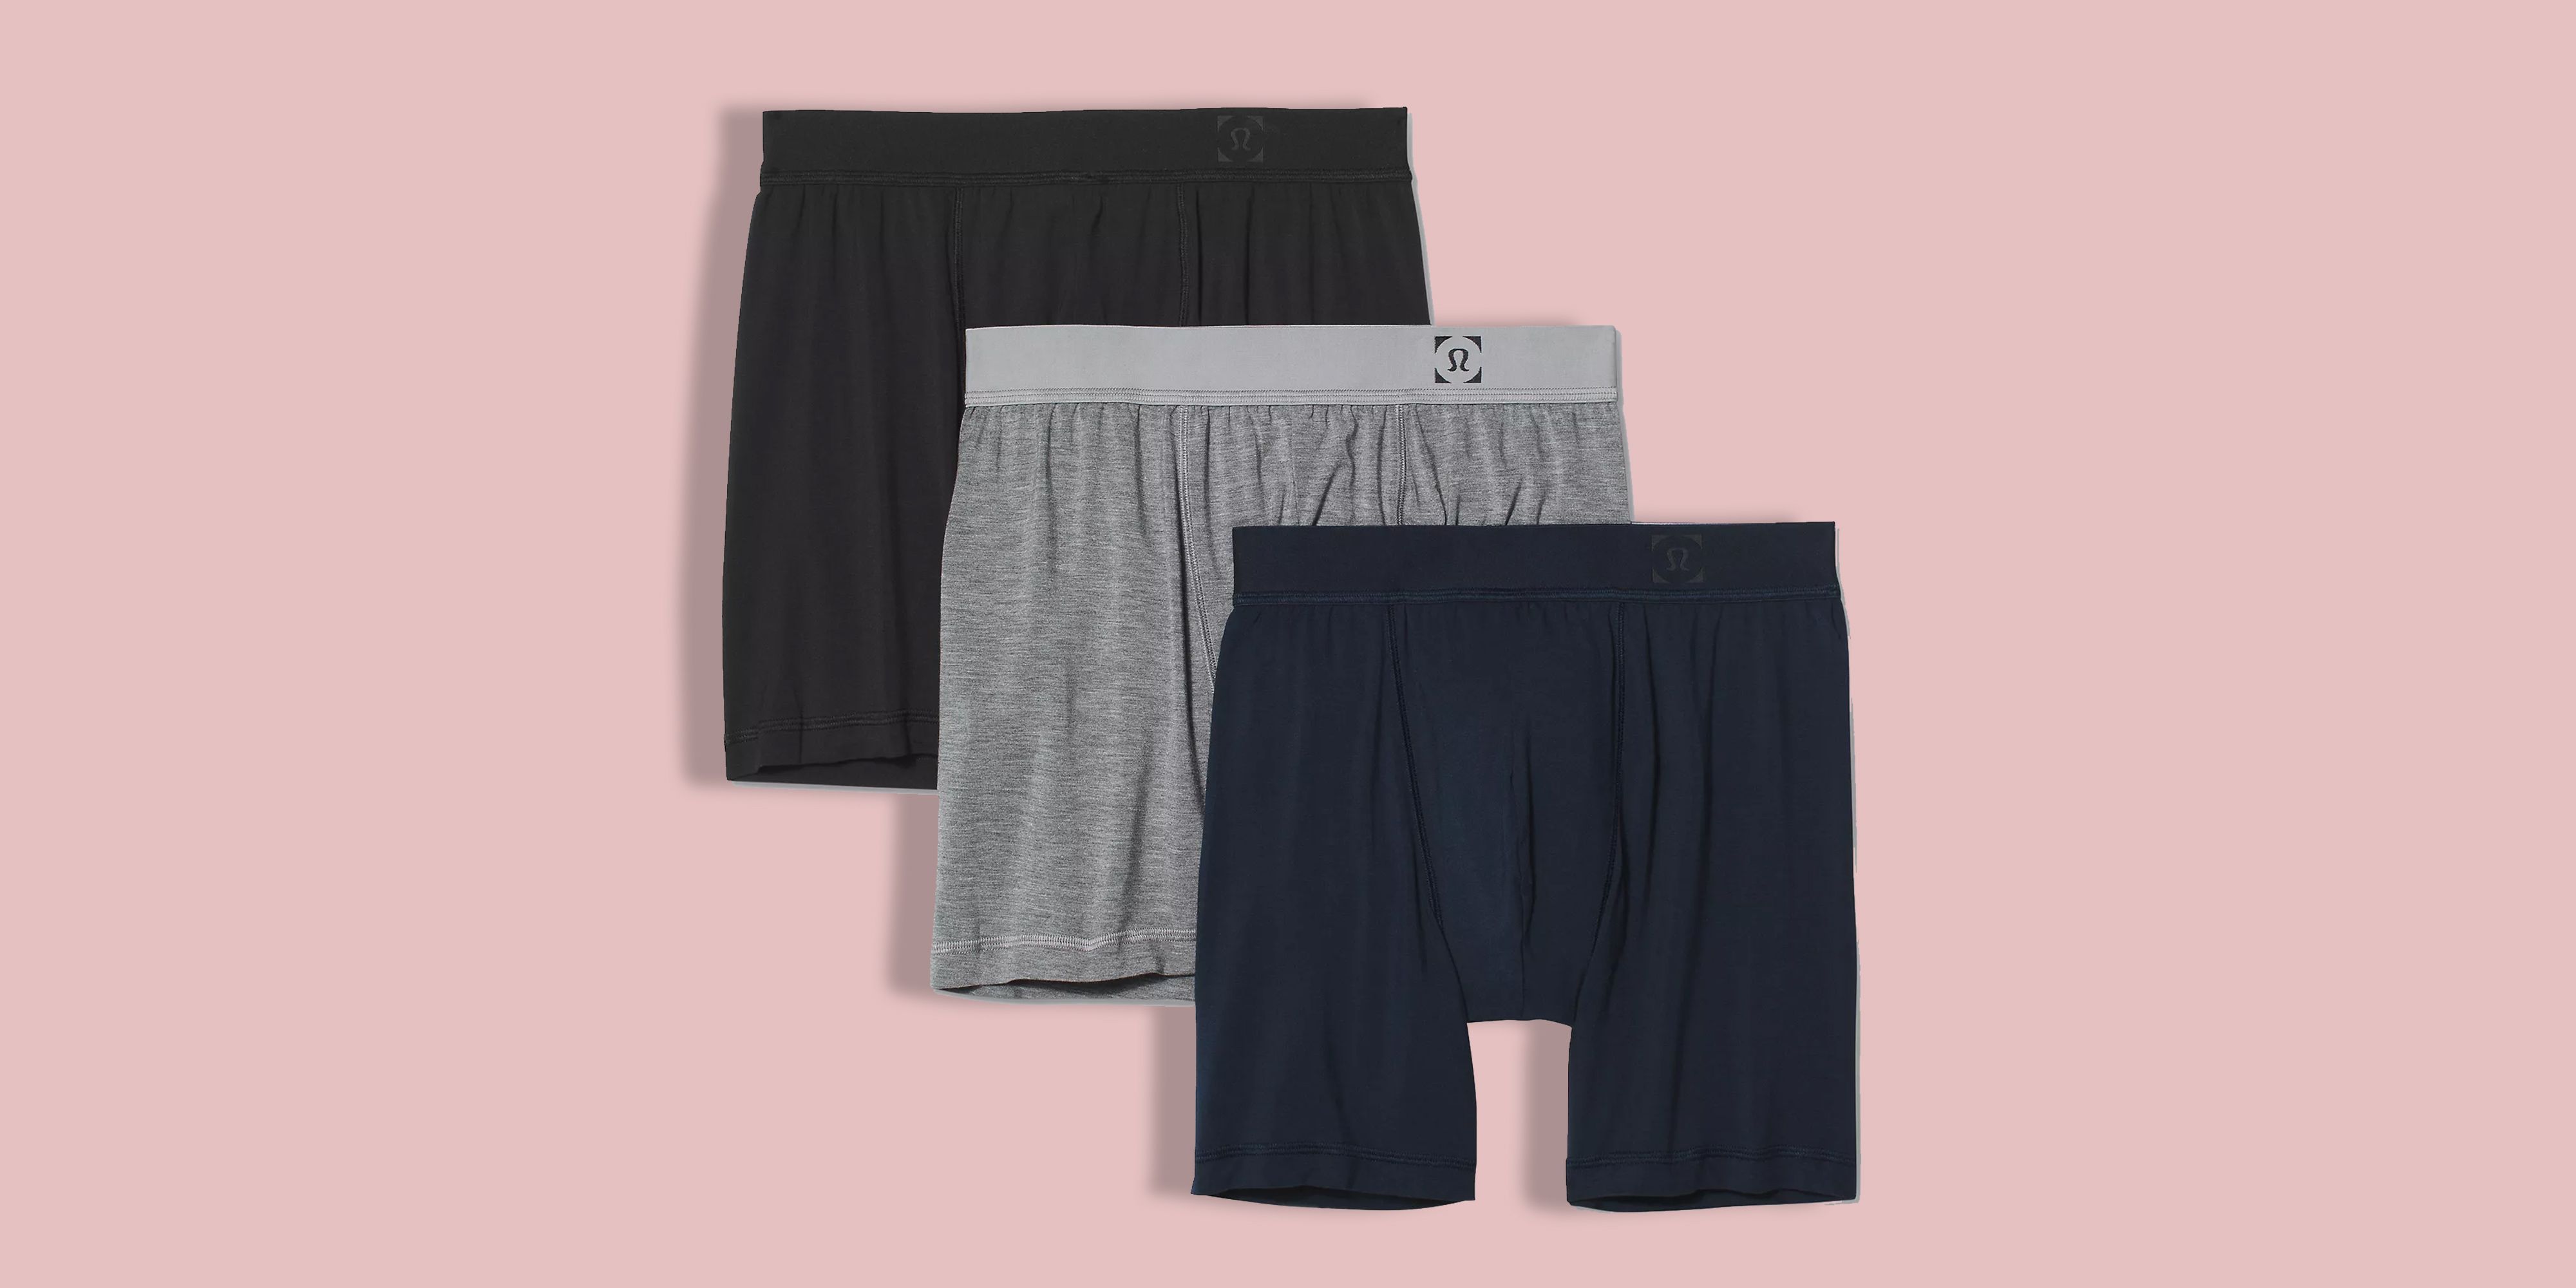 Ploeg Conjugeren verstoring 19 Best Men's Boxer Shorts for 2023 - Boxers to Wear Every Day